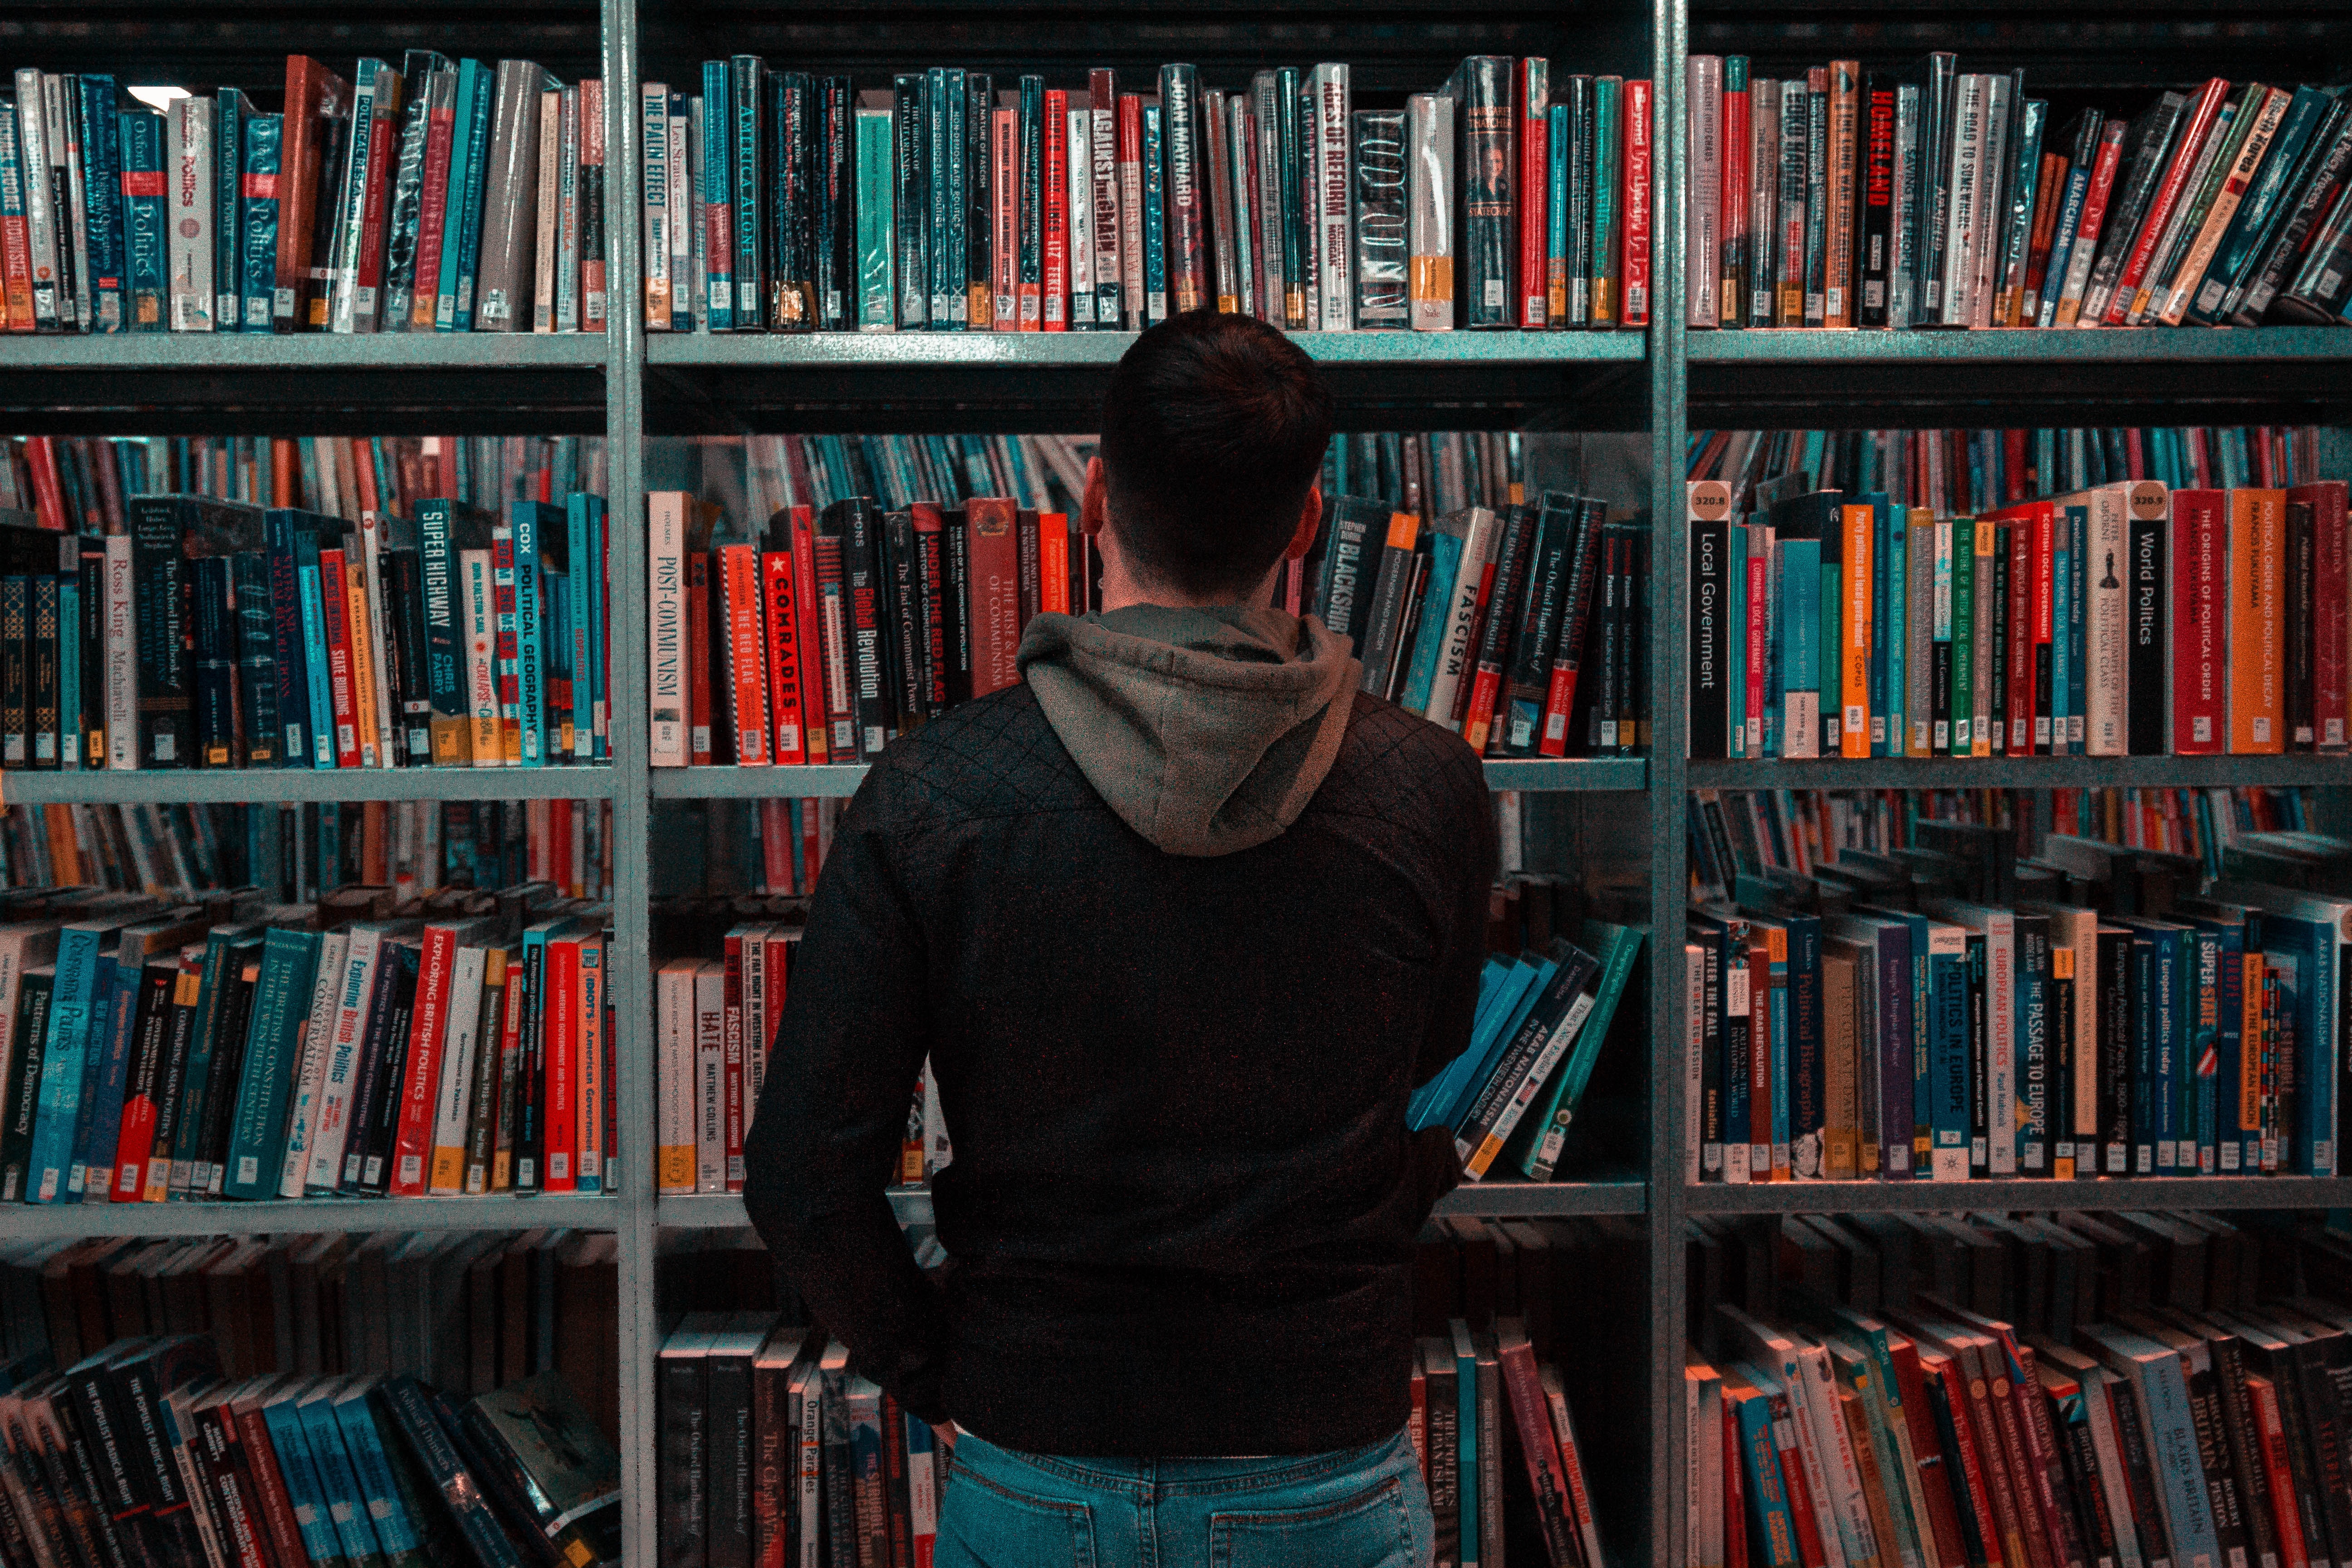 Young man wearing dark sweatshirt looking thoughtfully at library shelves of colorful books.